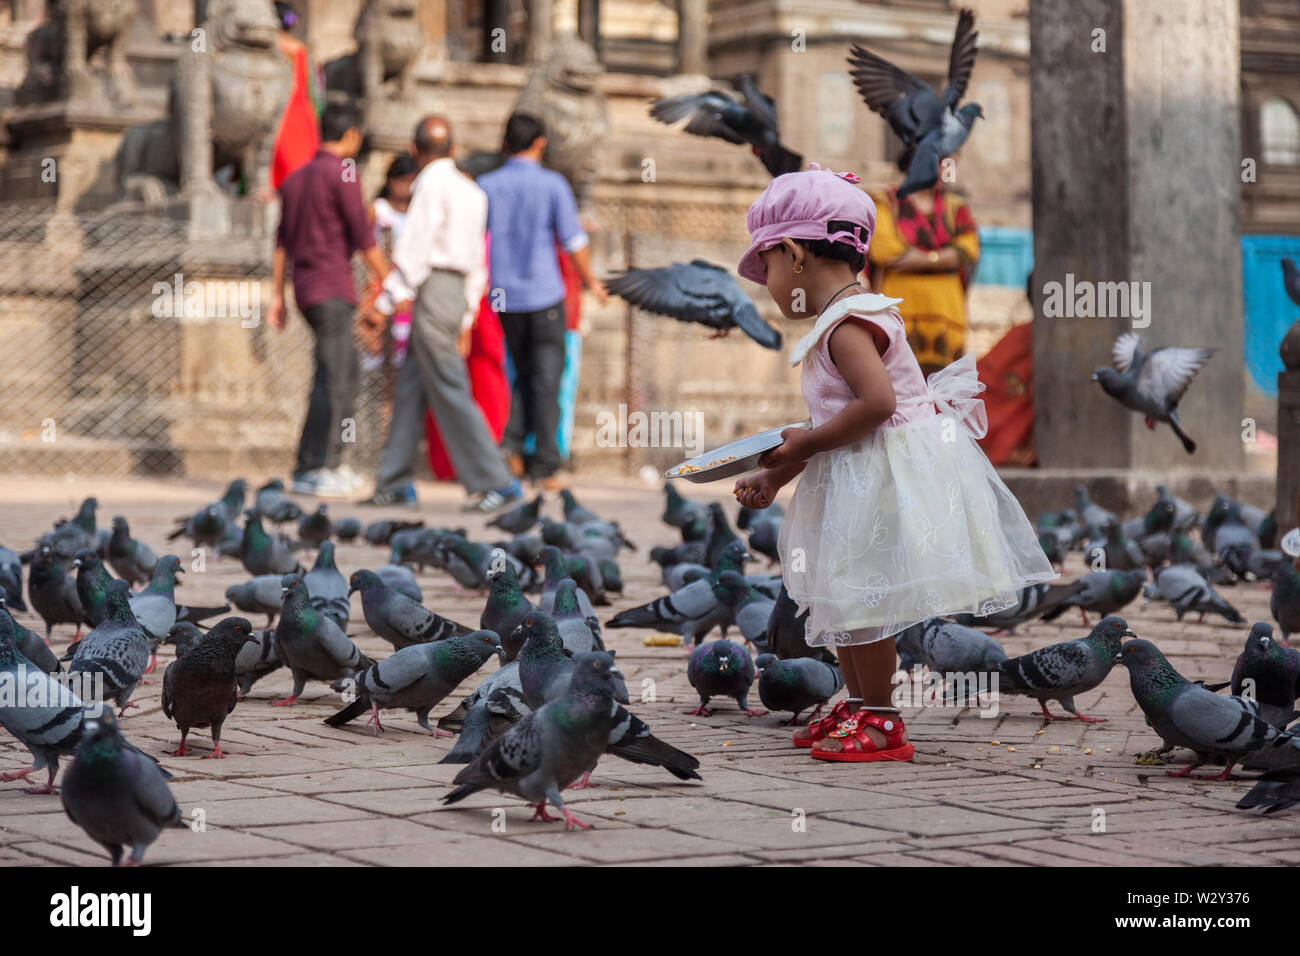 Young girl wearing a pretty dress feeding pigeons in a Temple square in Kathmandu Stock Photo